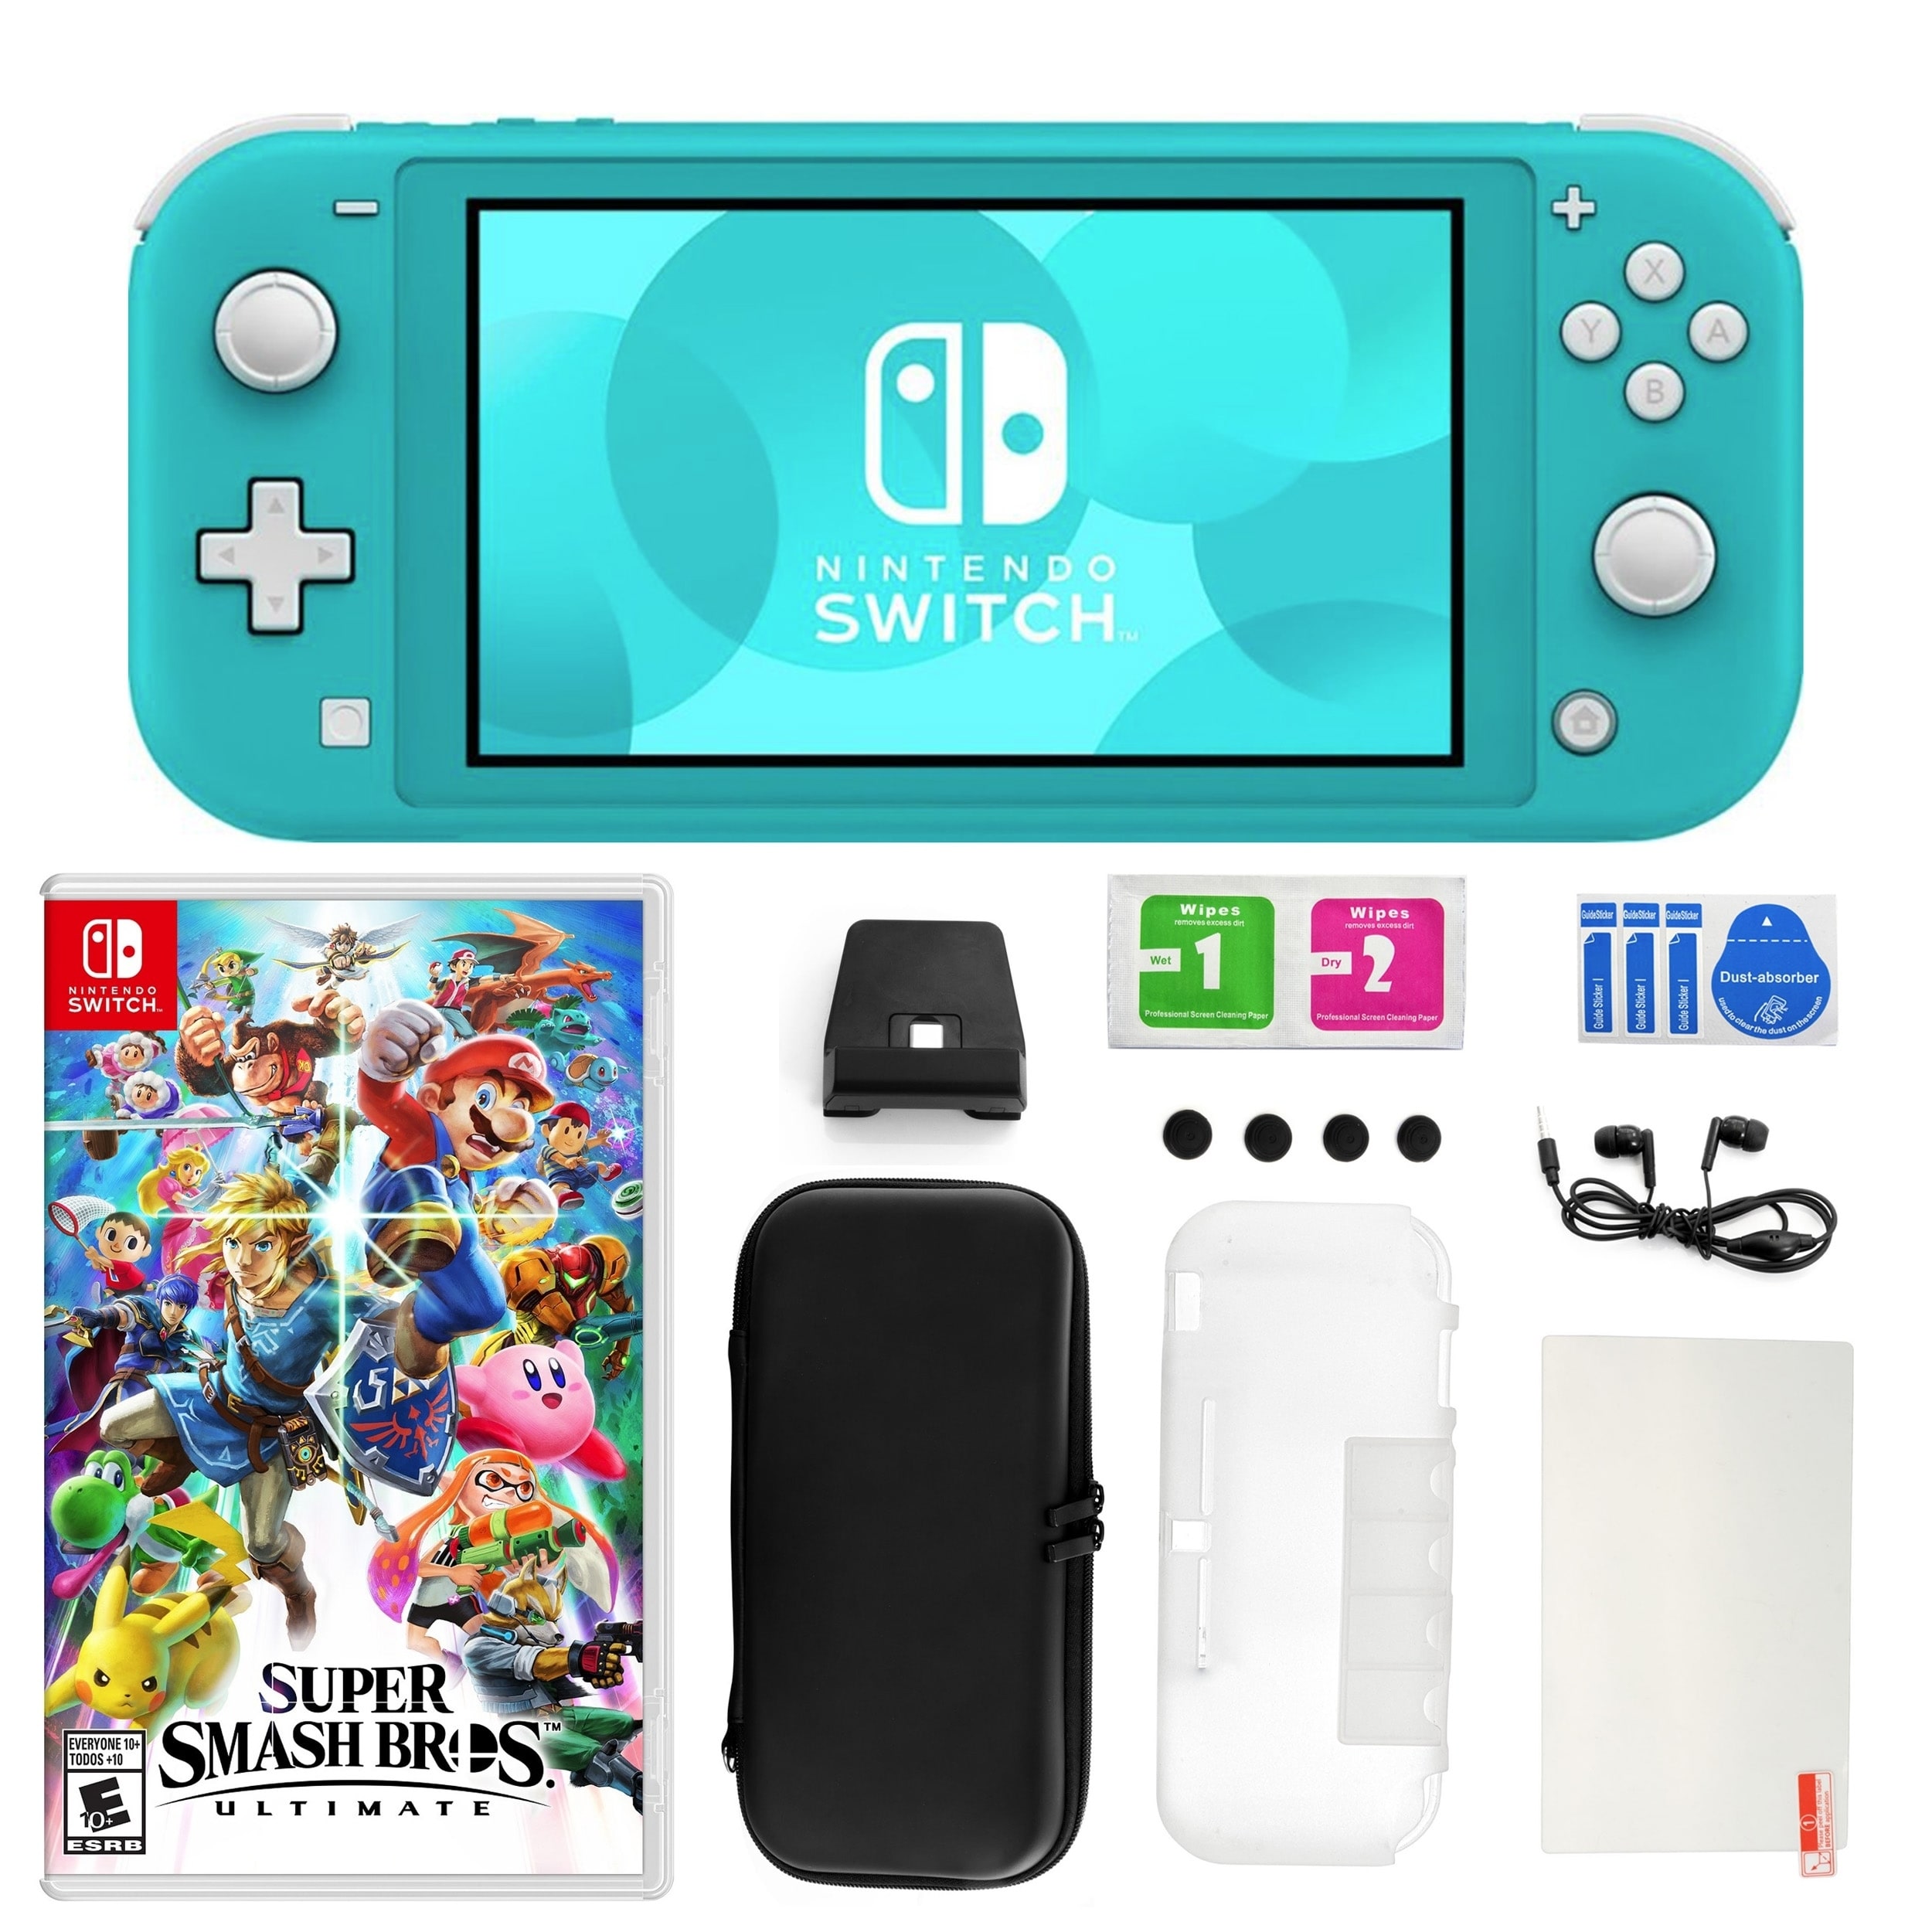 are all games compatible with switch lite